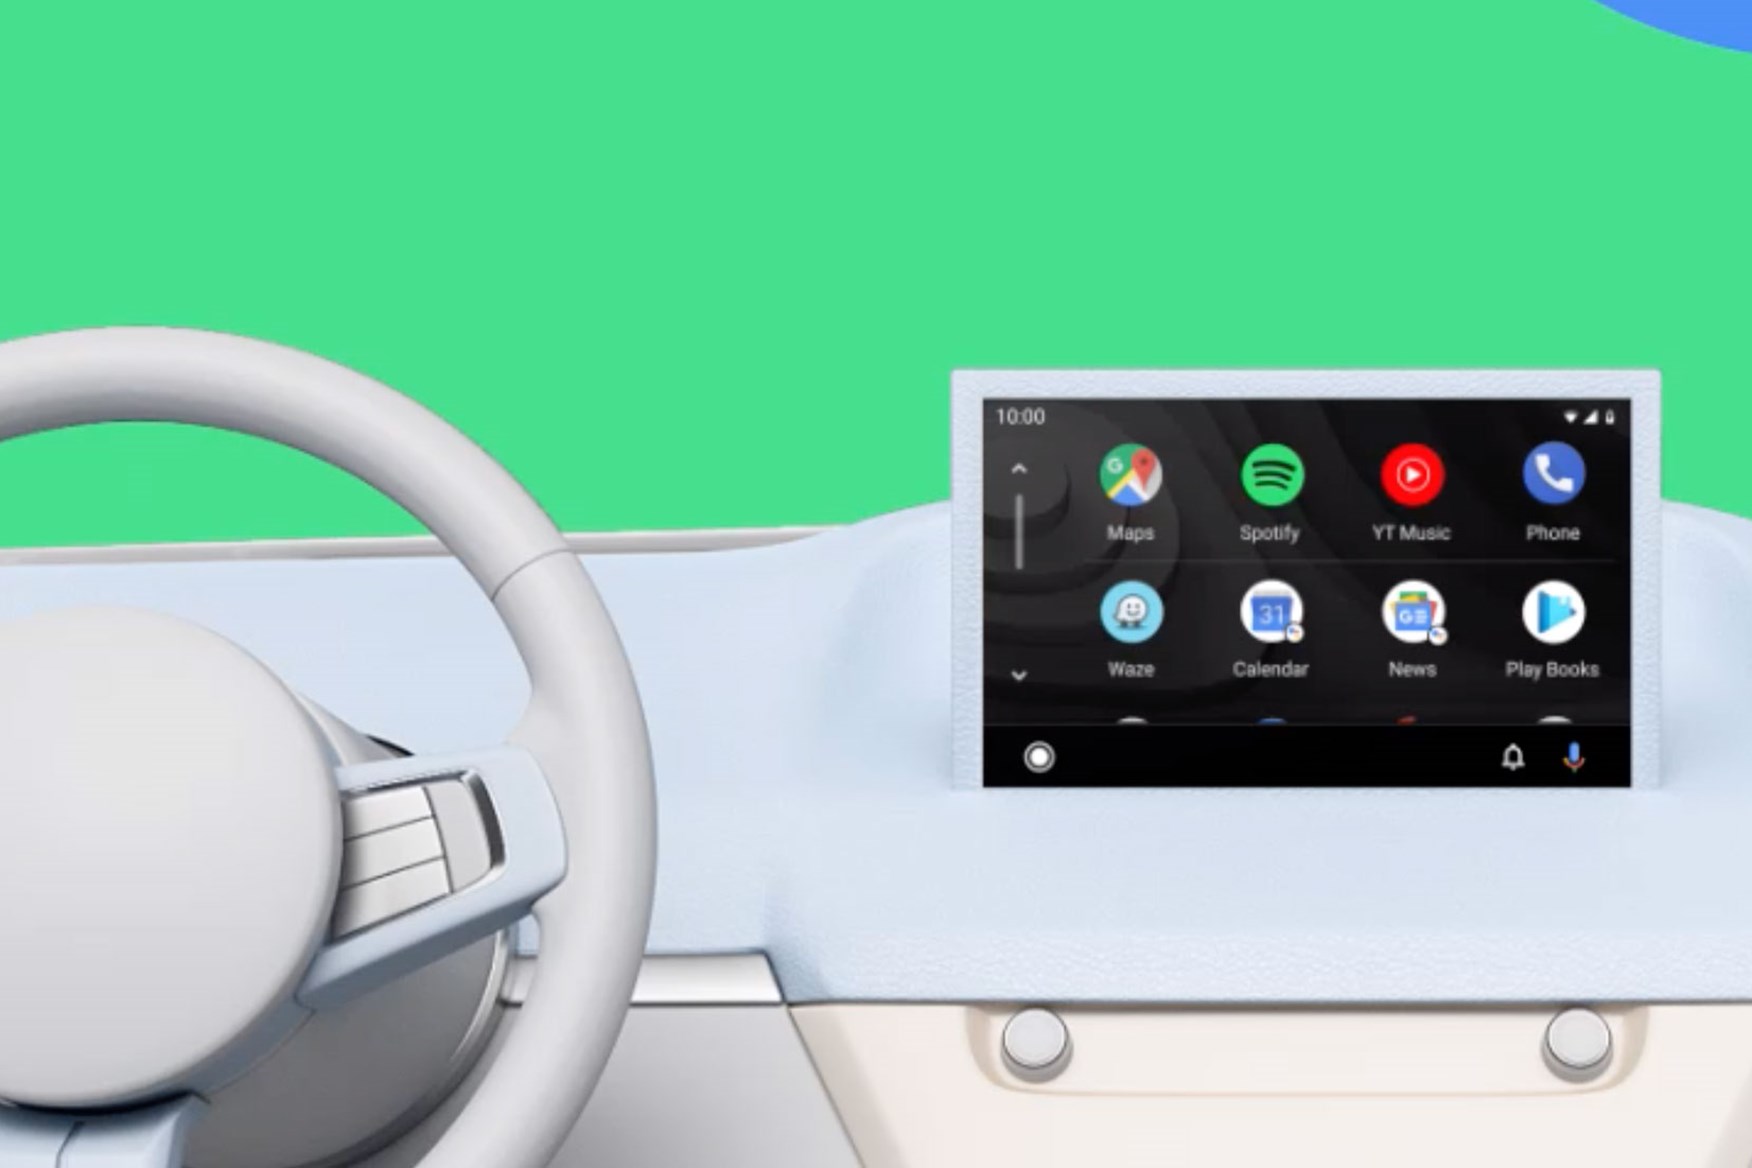 download android auto